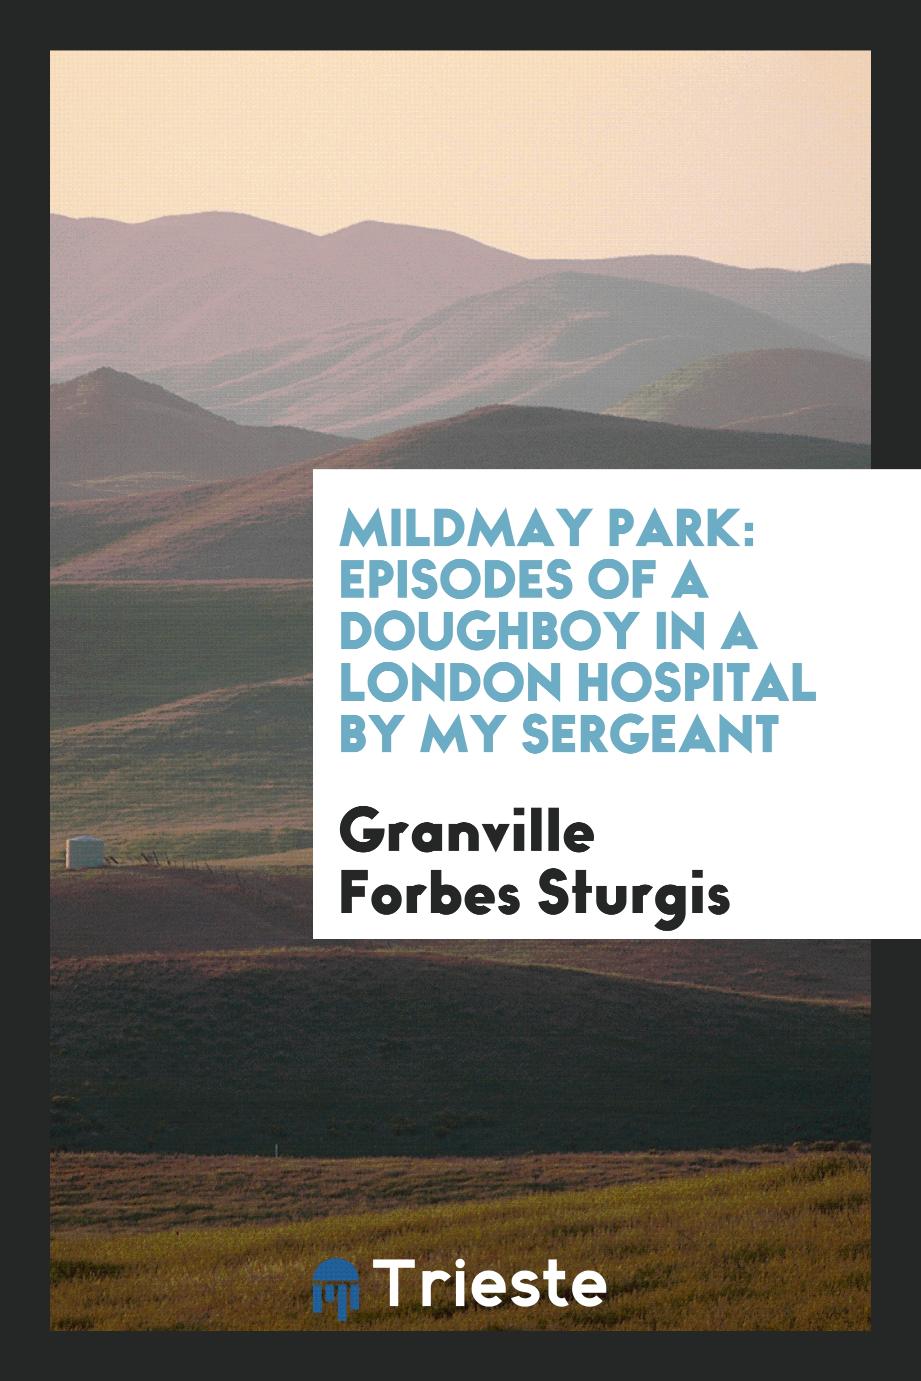 Mildmay Park: Episodes of a Doughboy in a London Hospital by My Sergeant